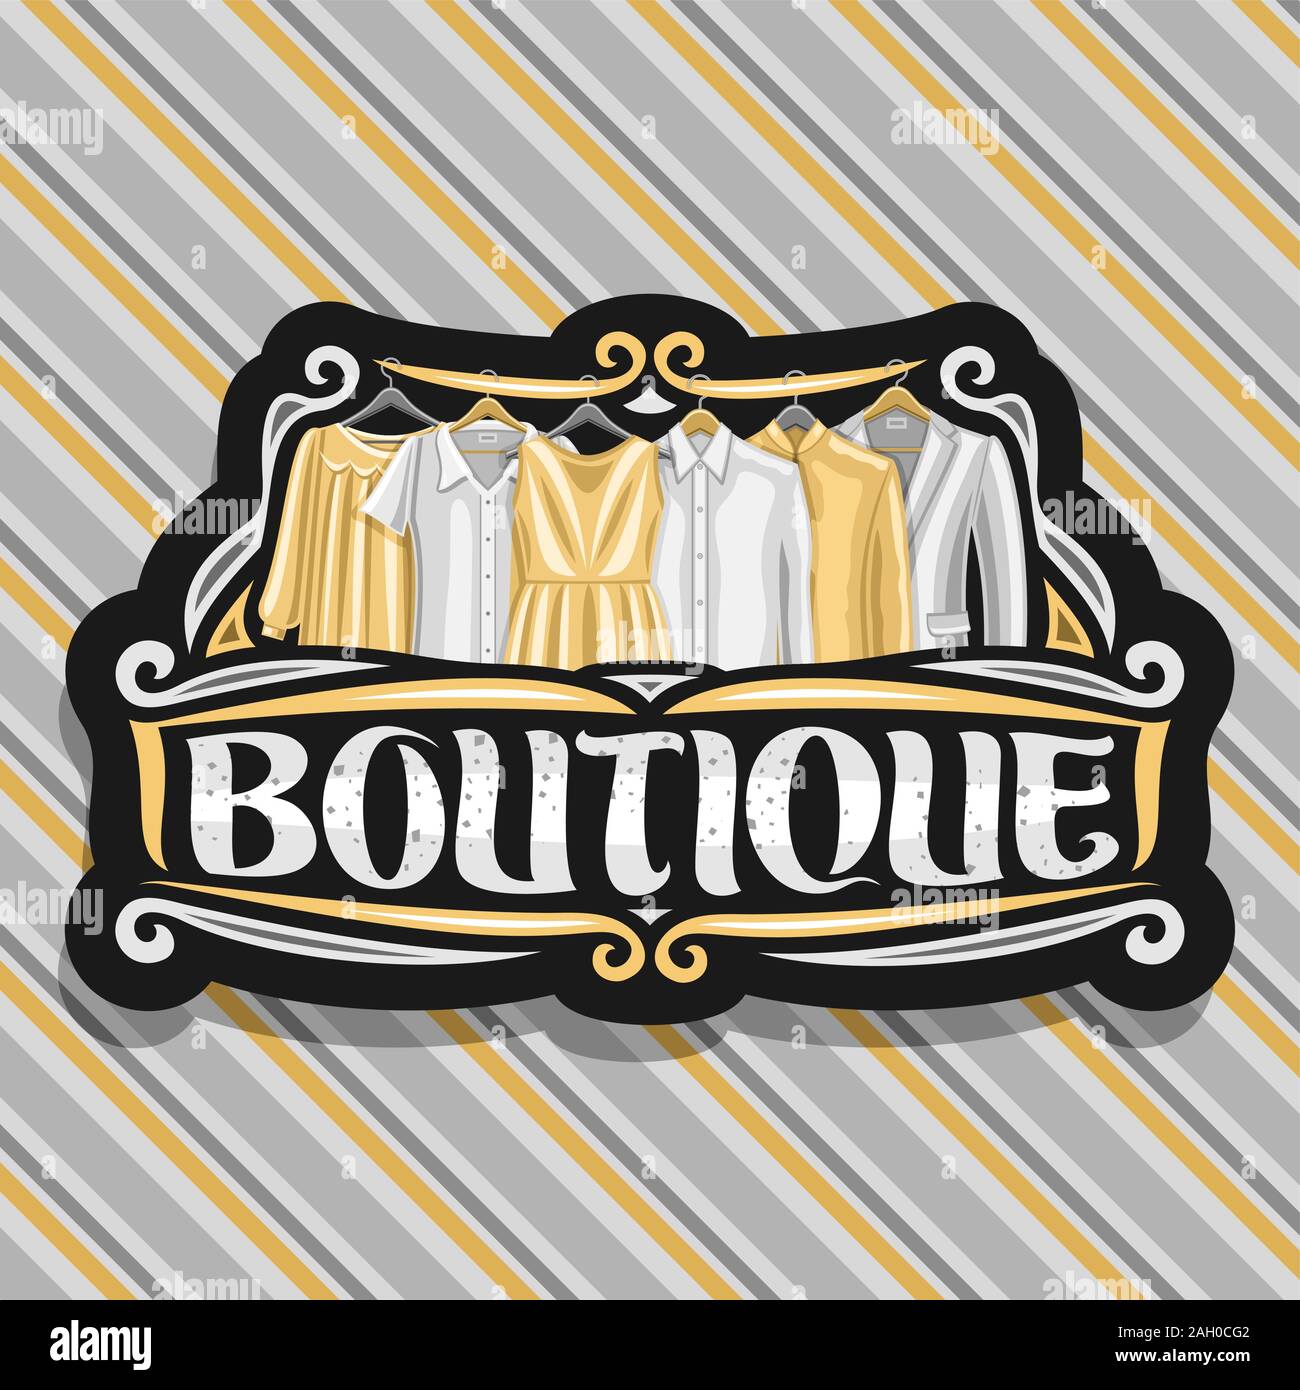 Vector logo for Boutique, black sign board with illustration of women's dresses and grey men's jackets, original brush typeface for word boutique, fas Stock Vector